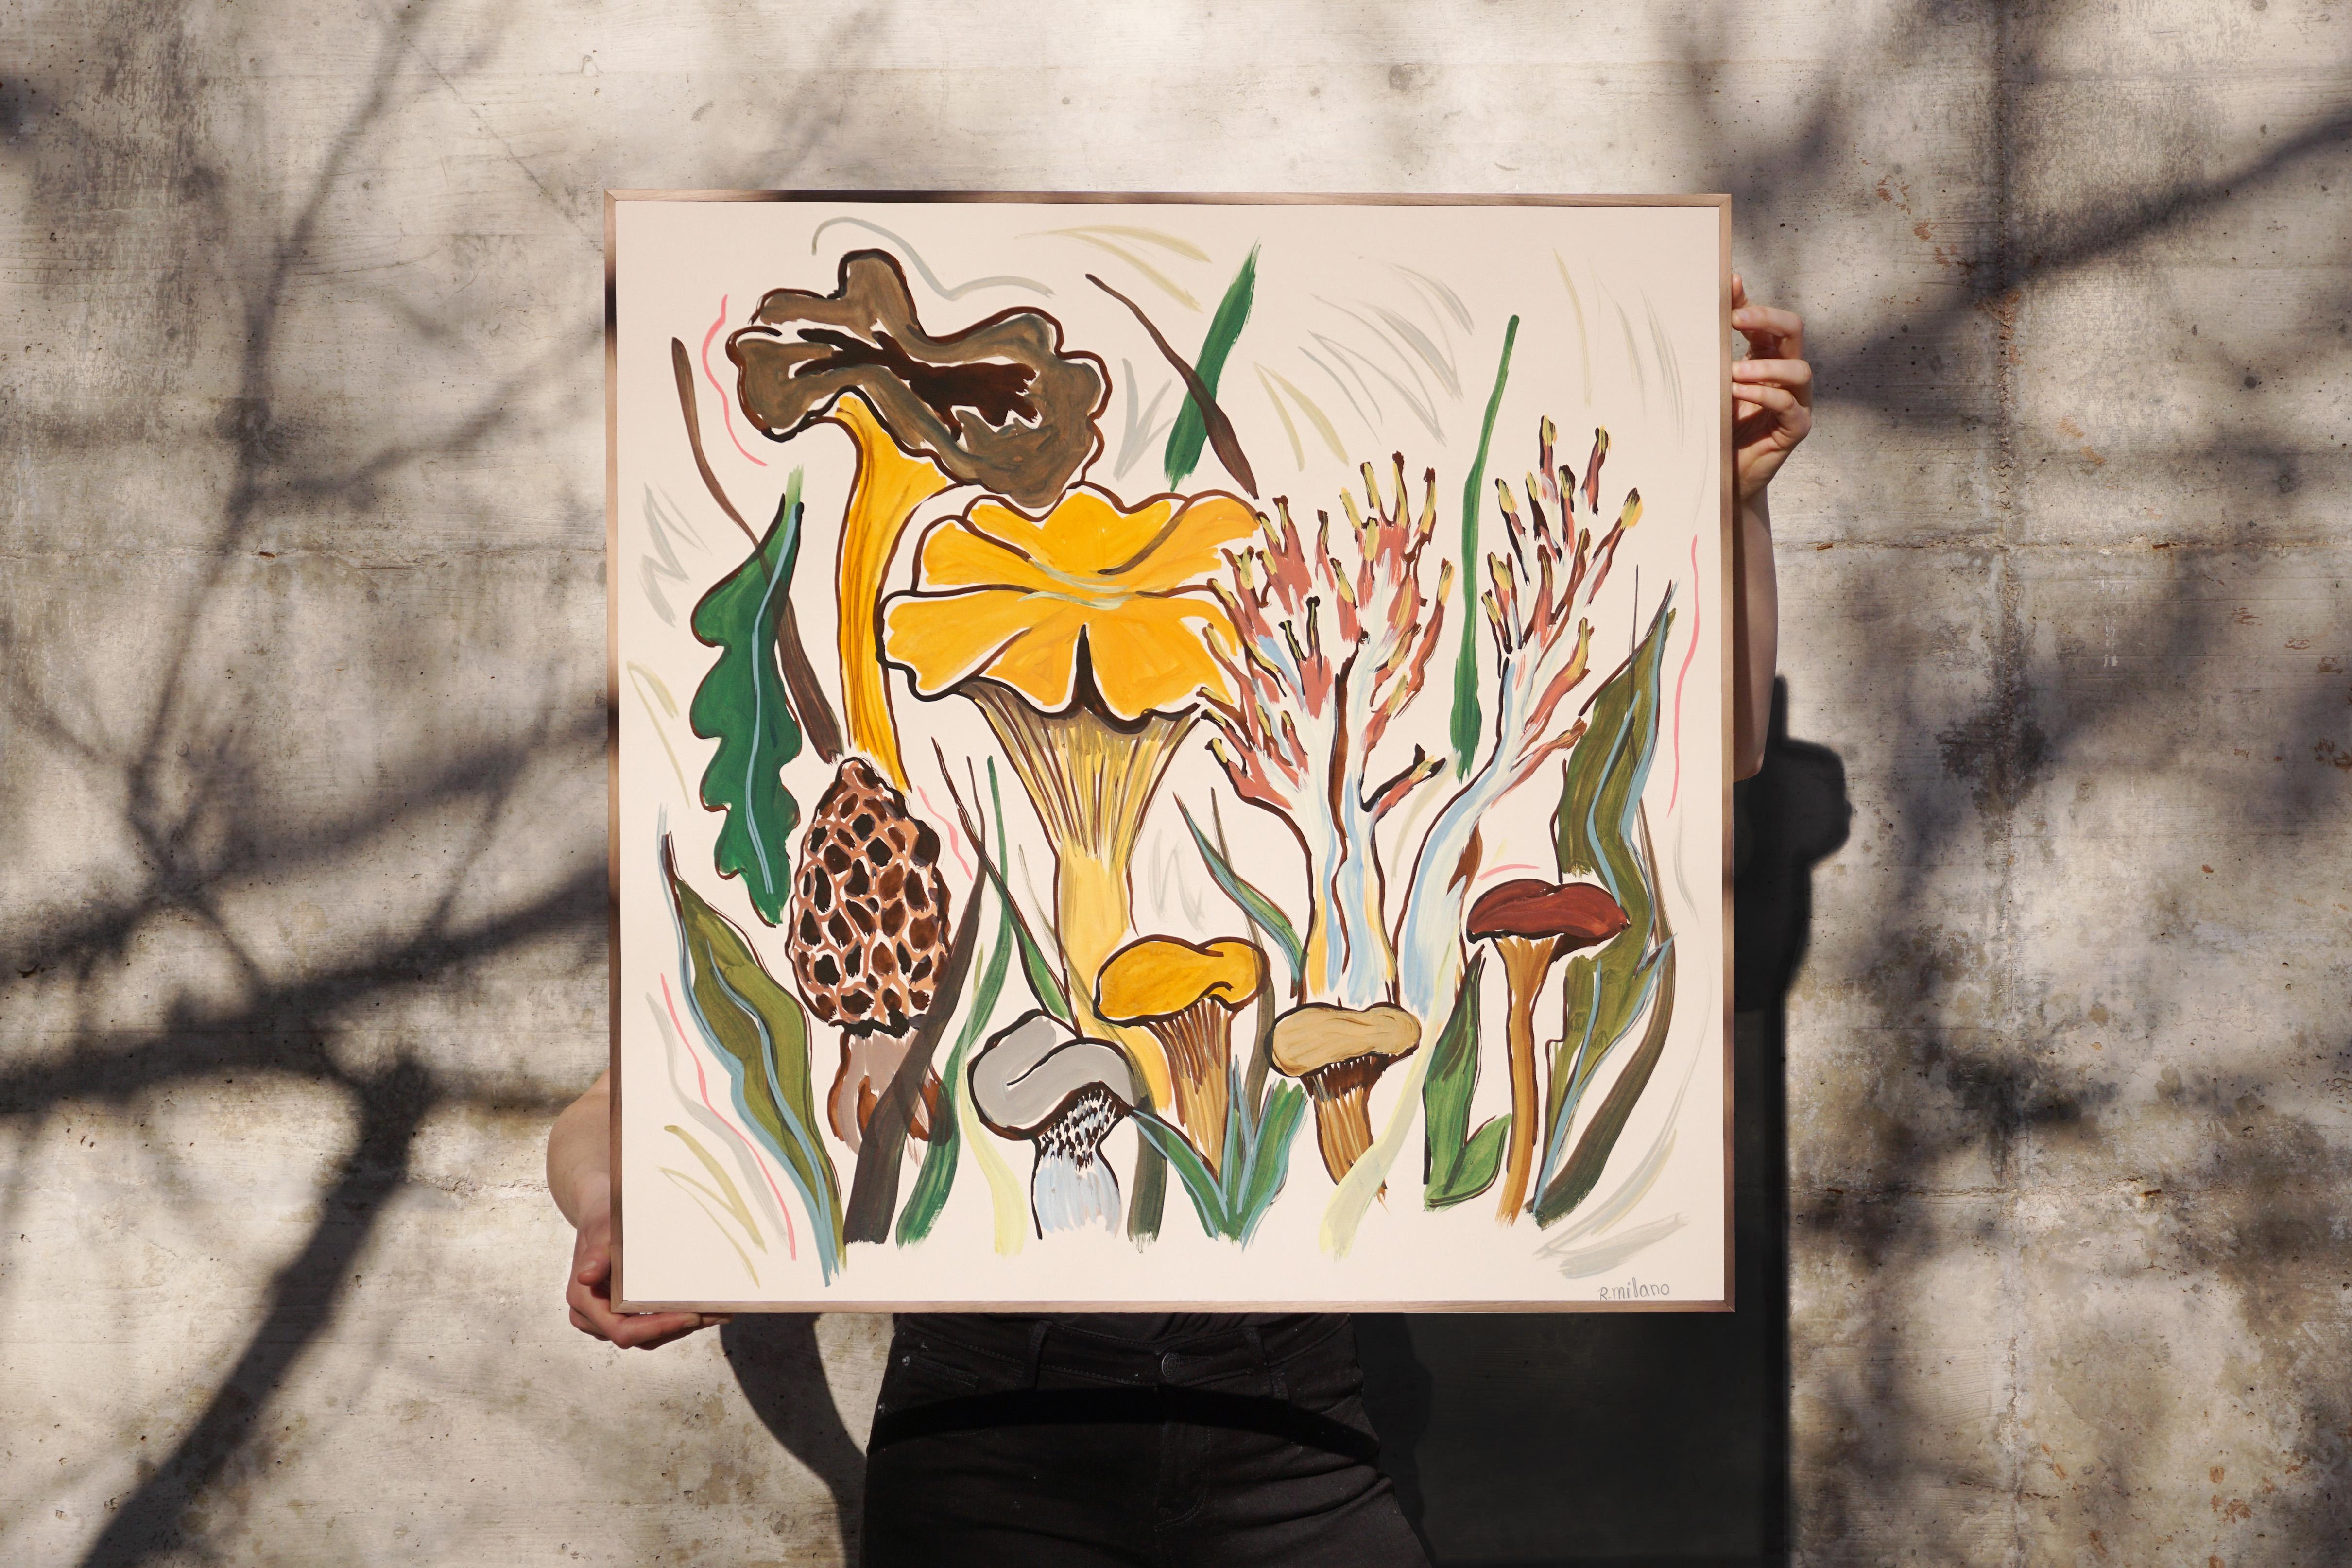 Wild Mushrooms Harvest , Earth Tones Squared Landscape, Illustration Style Brown - Painting by Romina Milano